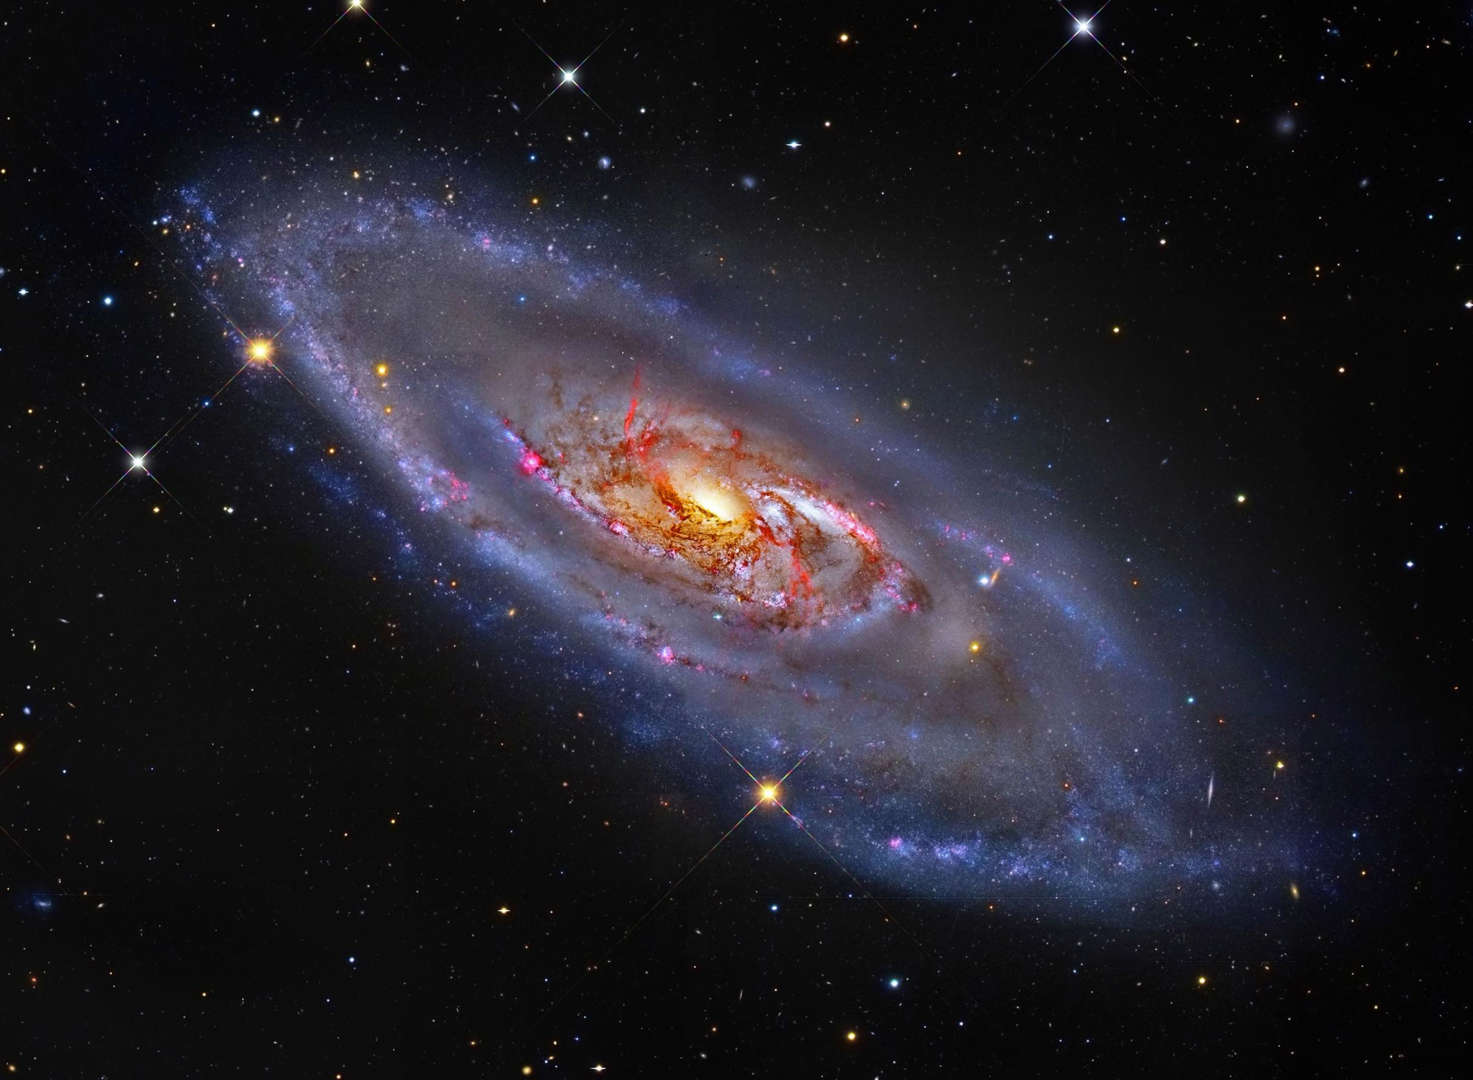 What's happening at the center of spiral galaxy M106? A swirling disk of stars and gas, M106's appearance is dominated by blue spiral arms and red dust lanes near the nucleus, as shown in the featured image. The core of M106 glows brightly in radio waves and X-rays where twin jets have been found running the length of the galaxy. An unusual central glow makes M106 one of the closest examples of the Seyfert class of galaxies, where vast amounts of glowing gas are thought to be falling into a central massive black hole.